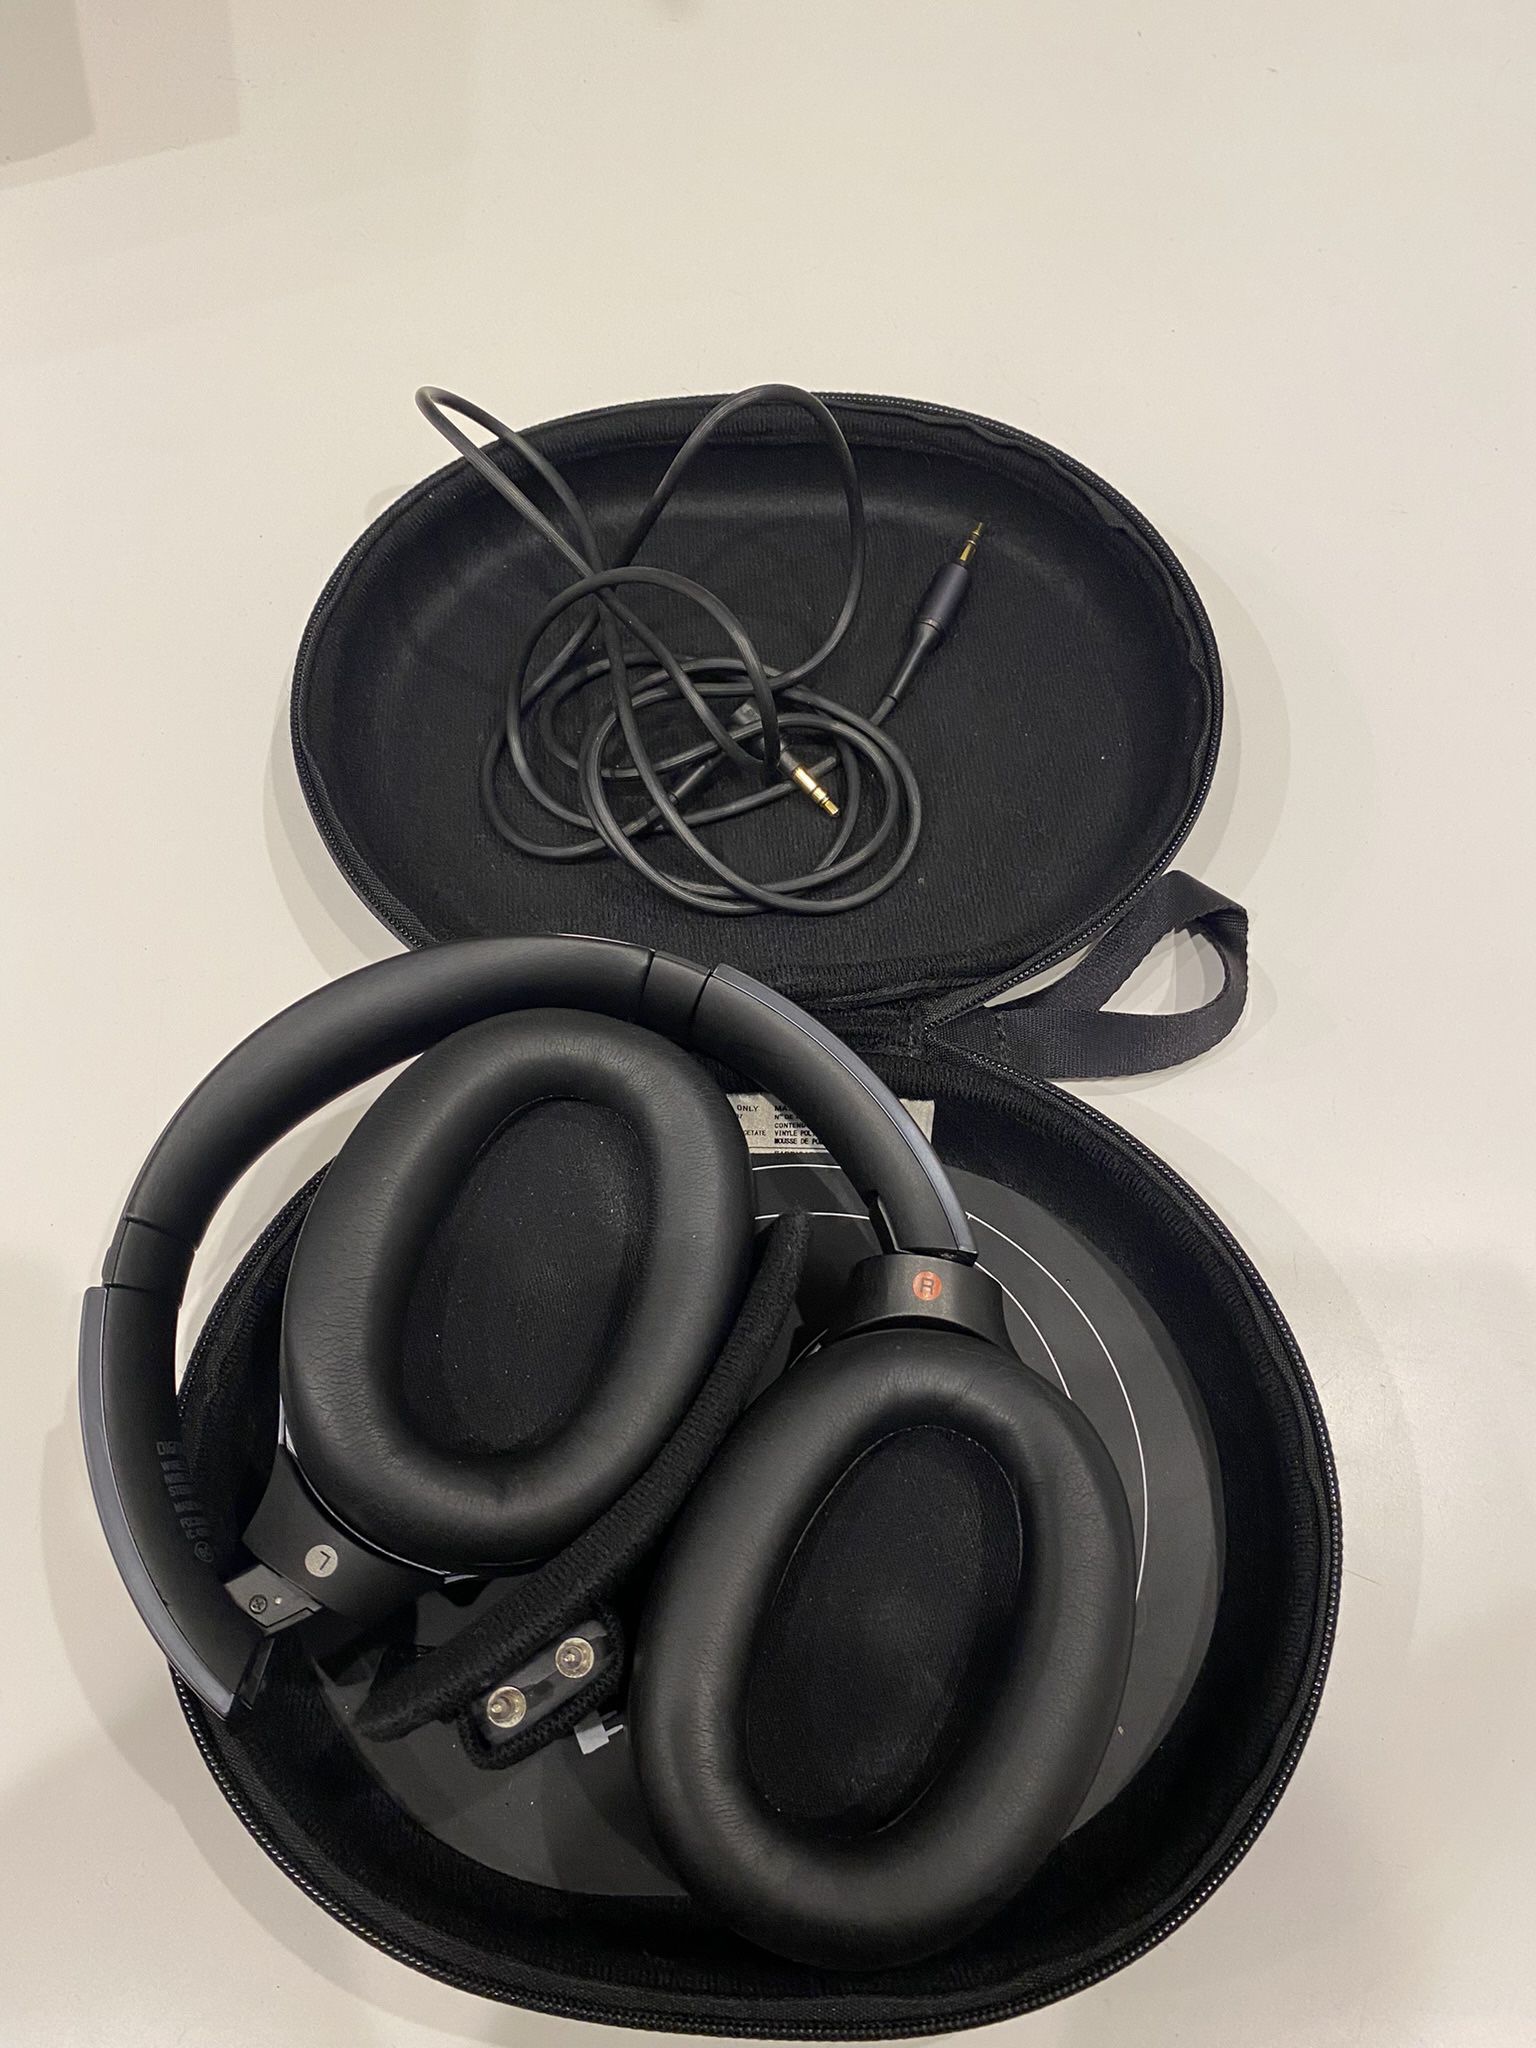 Sony Mdr-1000x Wireless Noise Canceling Headphones for Sale in